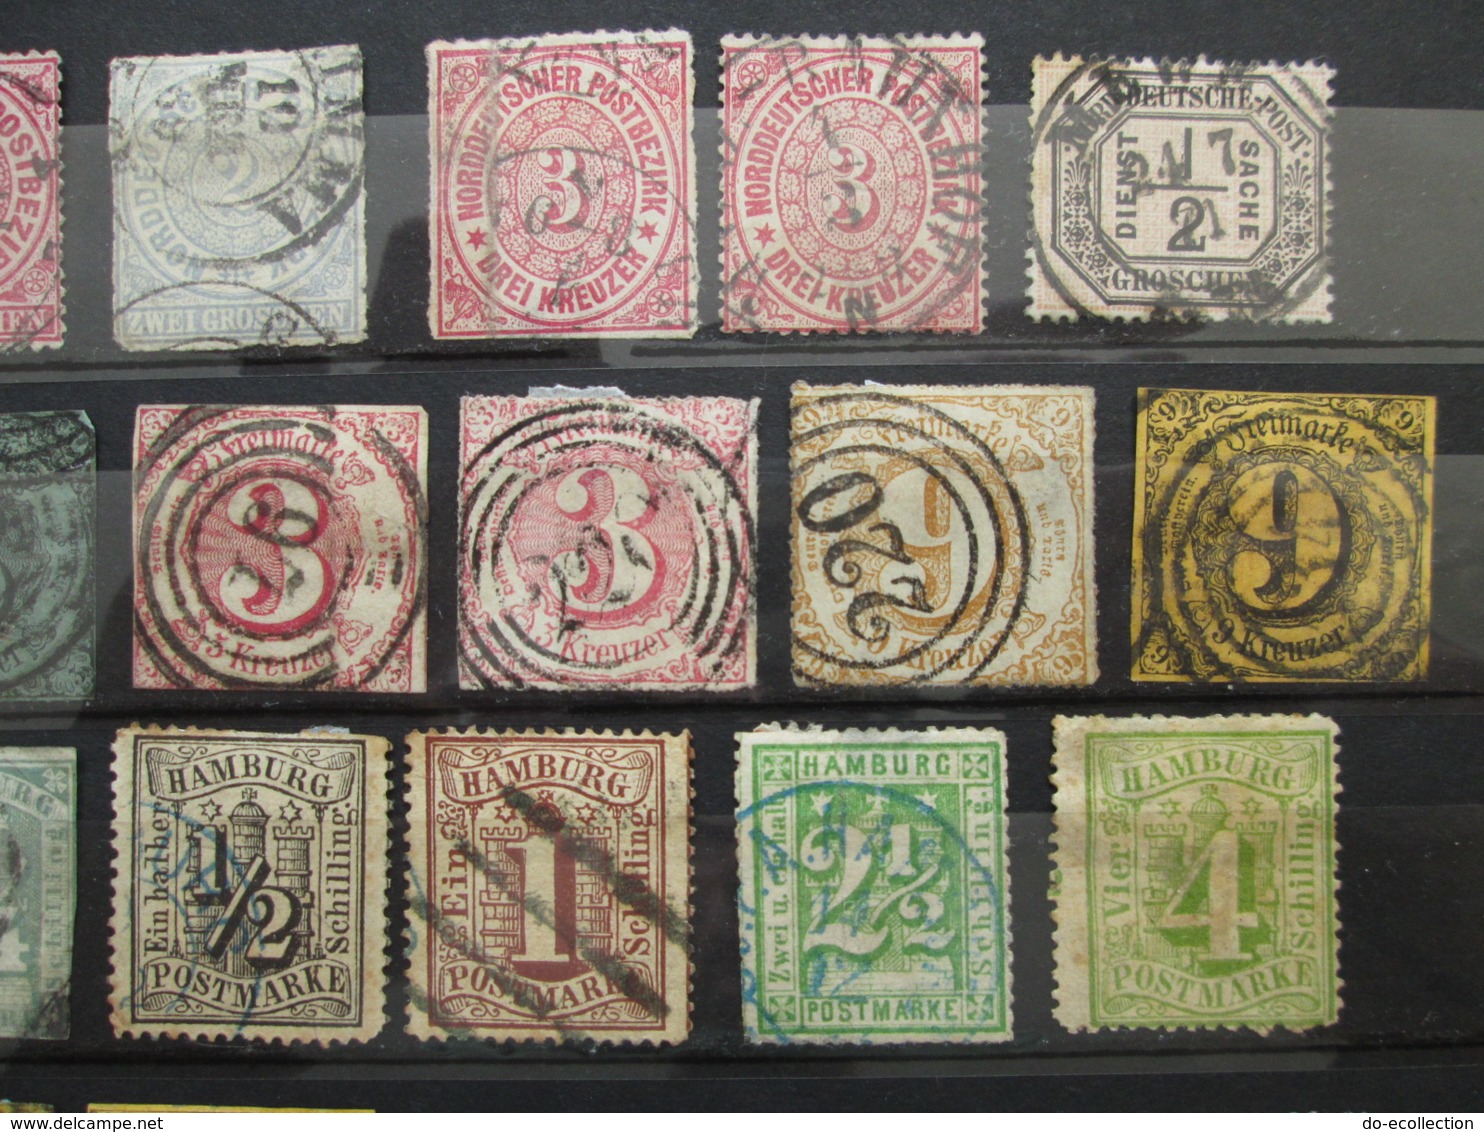 ALLEMAGNE ANCIENS ETATS collection 70 timbres THURN & TAXIS HAMBURG NORTH ... HAMBOURG NORD GERMANY GERMAN STATES stamps